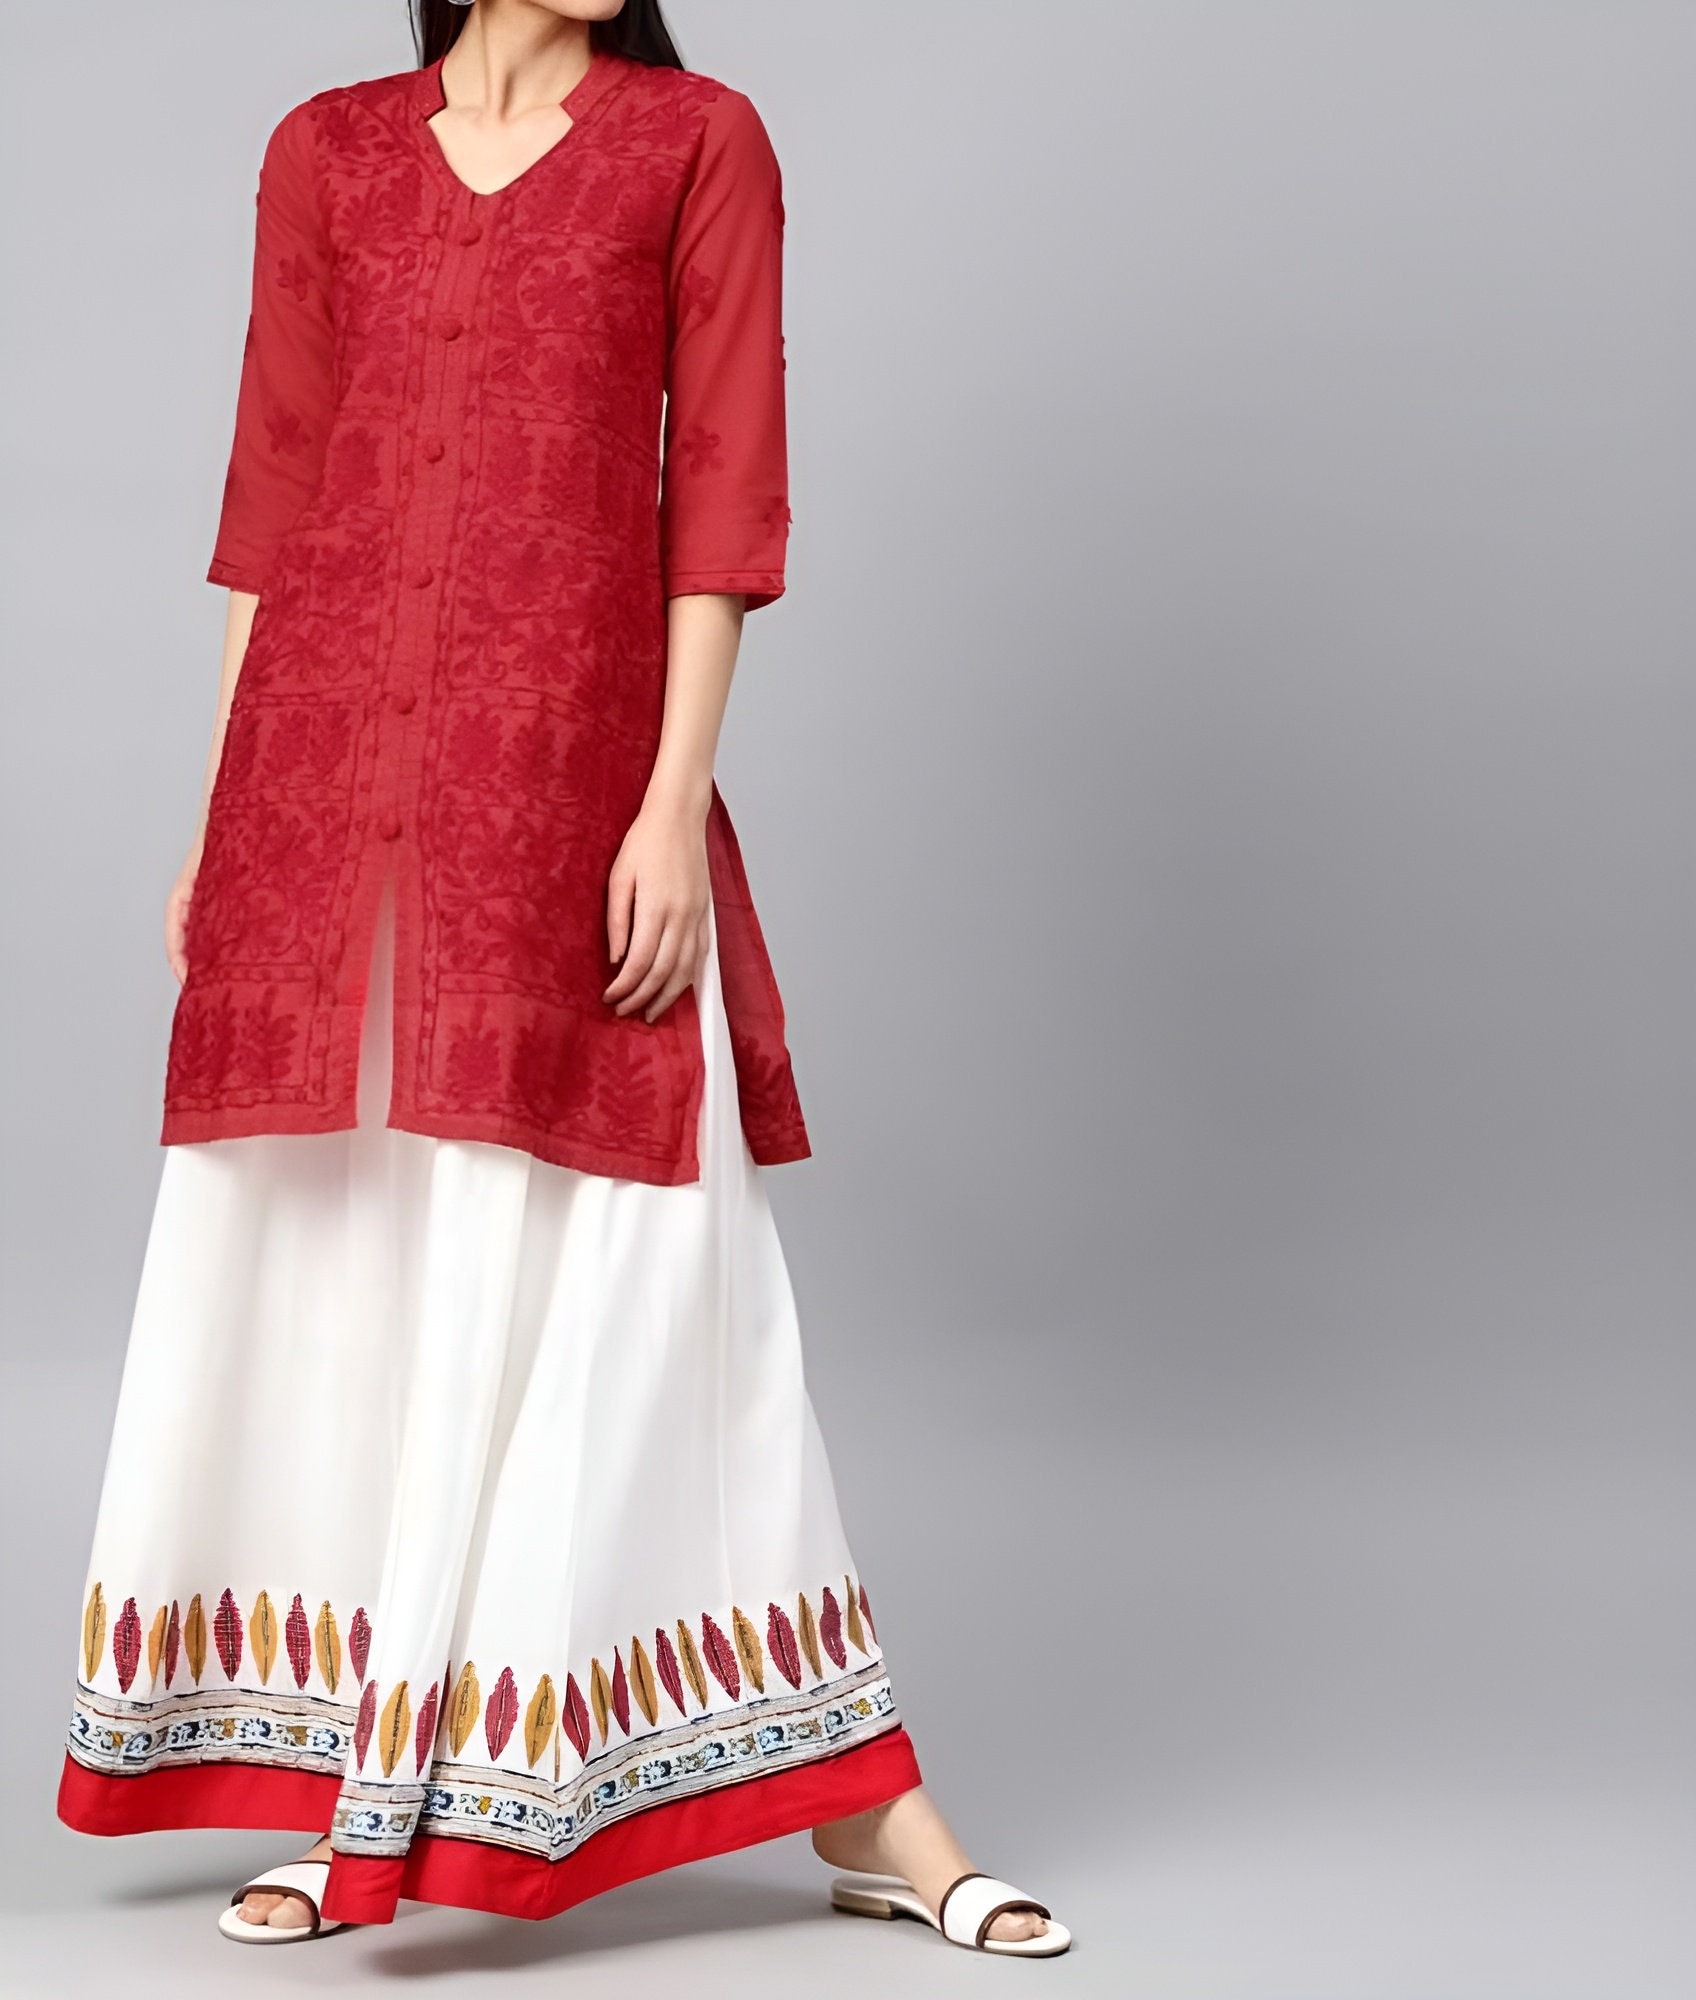 Palazzo Pant Suits Palazzo Dress Indian Palazzo Suits Palazzo Pants Suit  For Wedding #salwarkamee